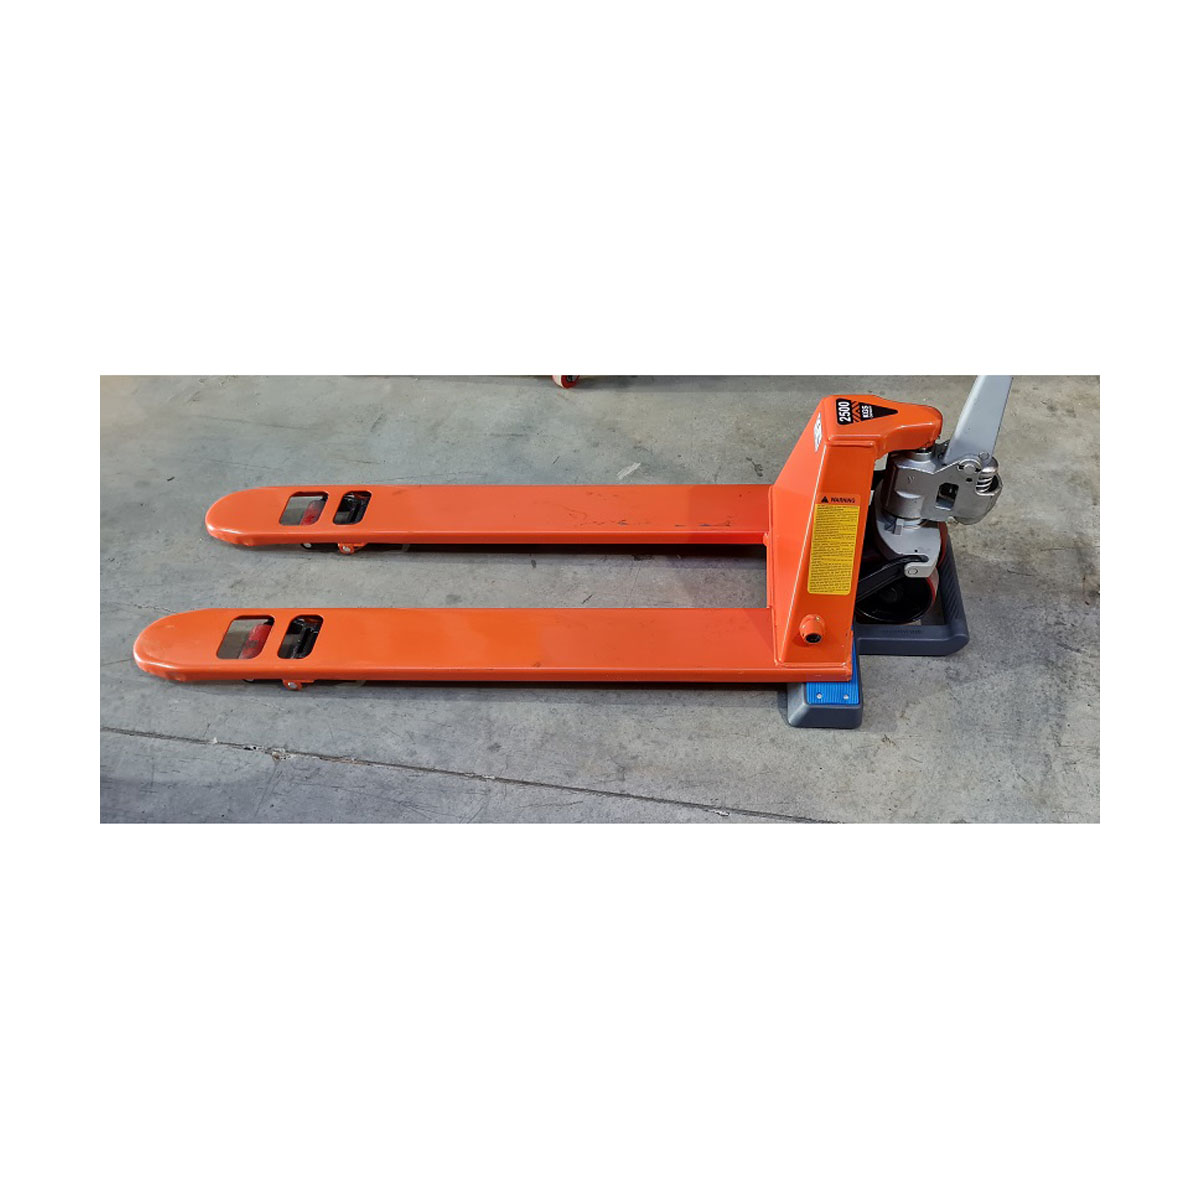 Pallet Truck Wheel Stop for Delivery Drivers